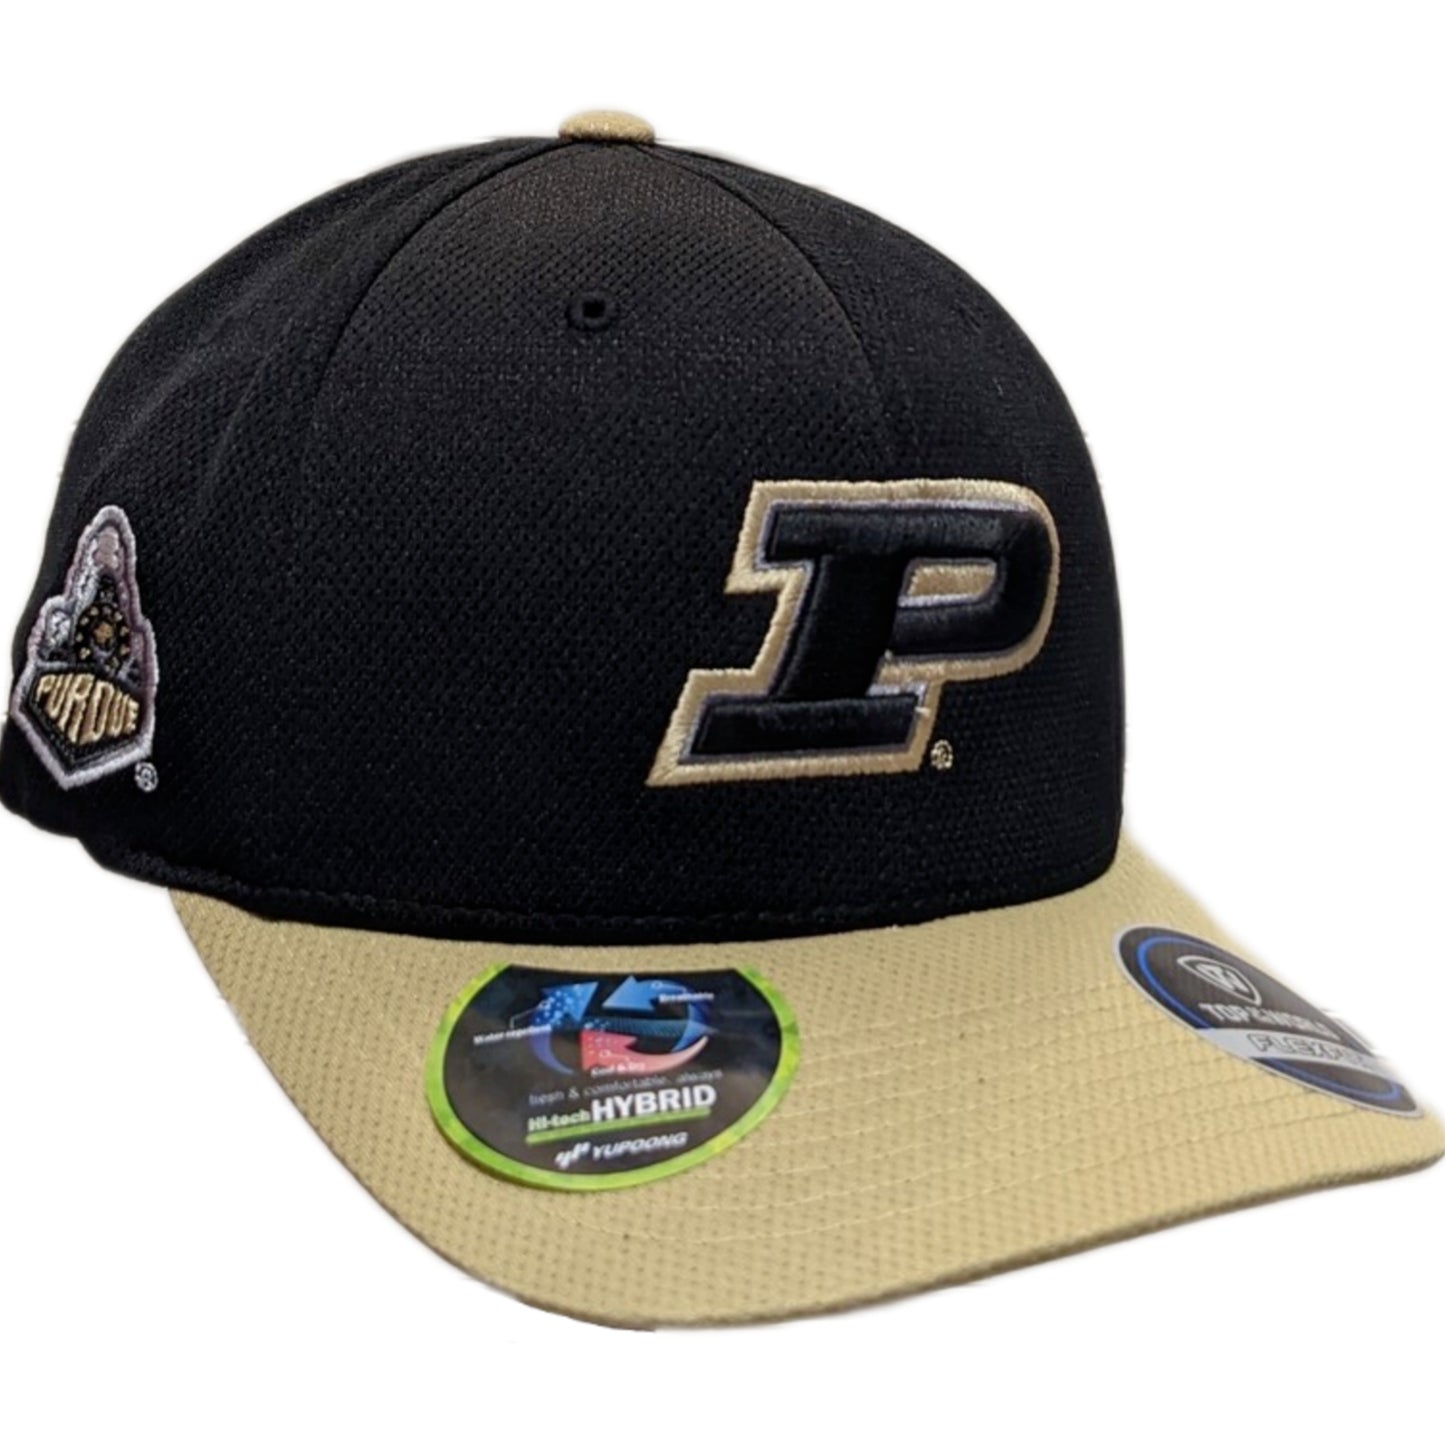 Purdue Boilermakers Top of the World Two-Tone Reflex Hybrid Tech Flex Hat -Black/Gold